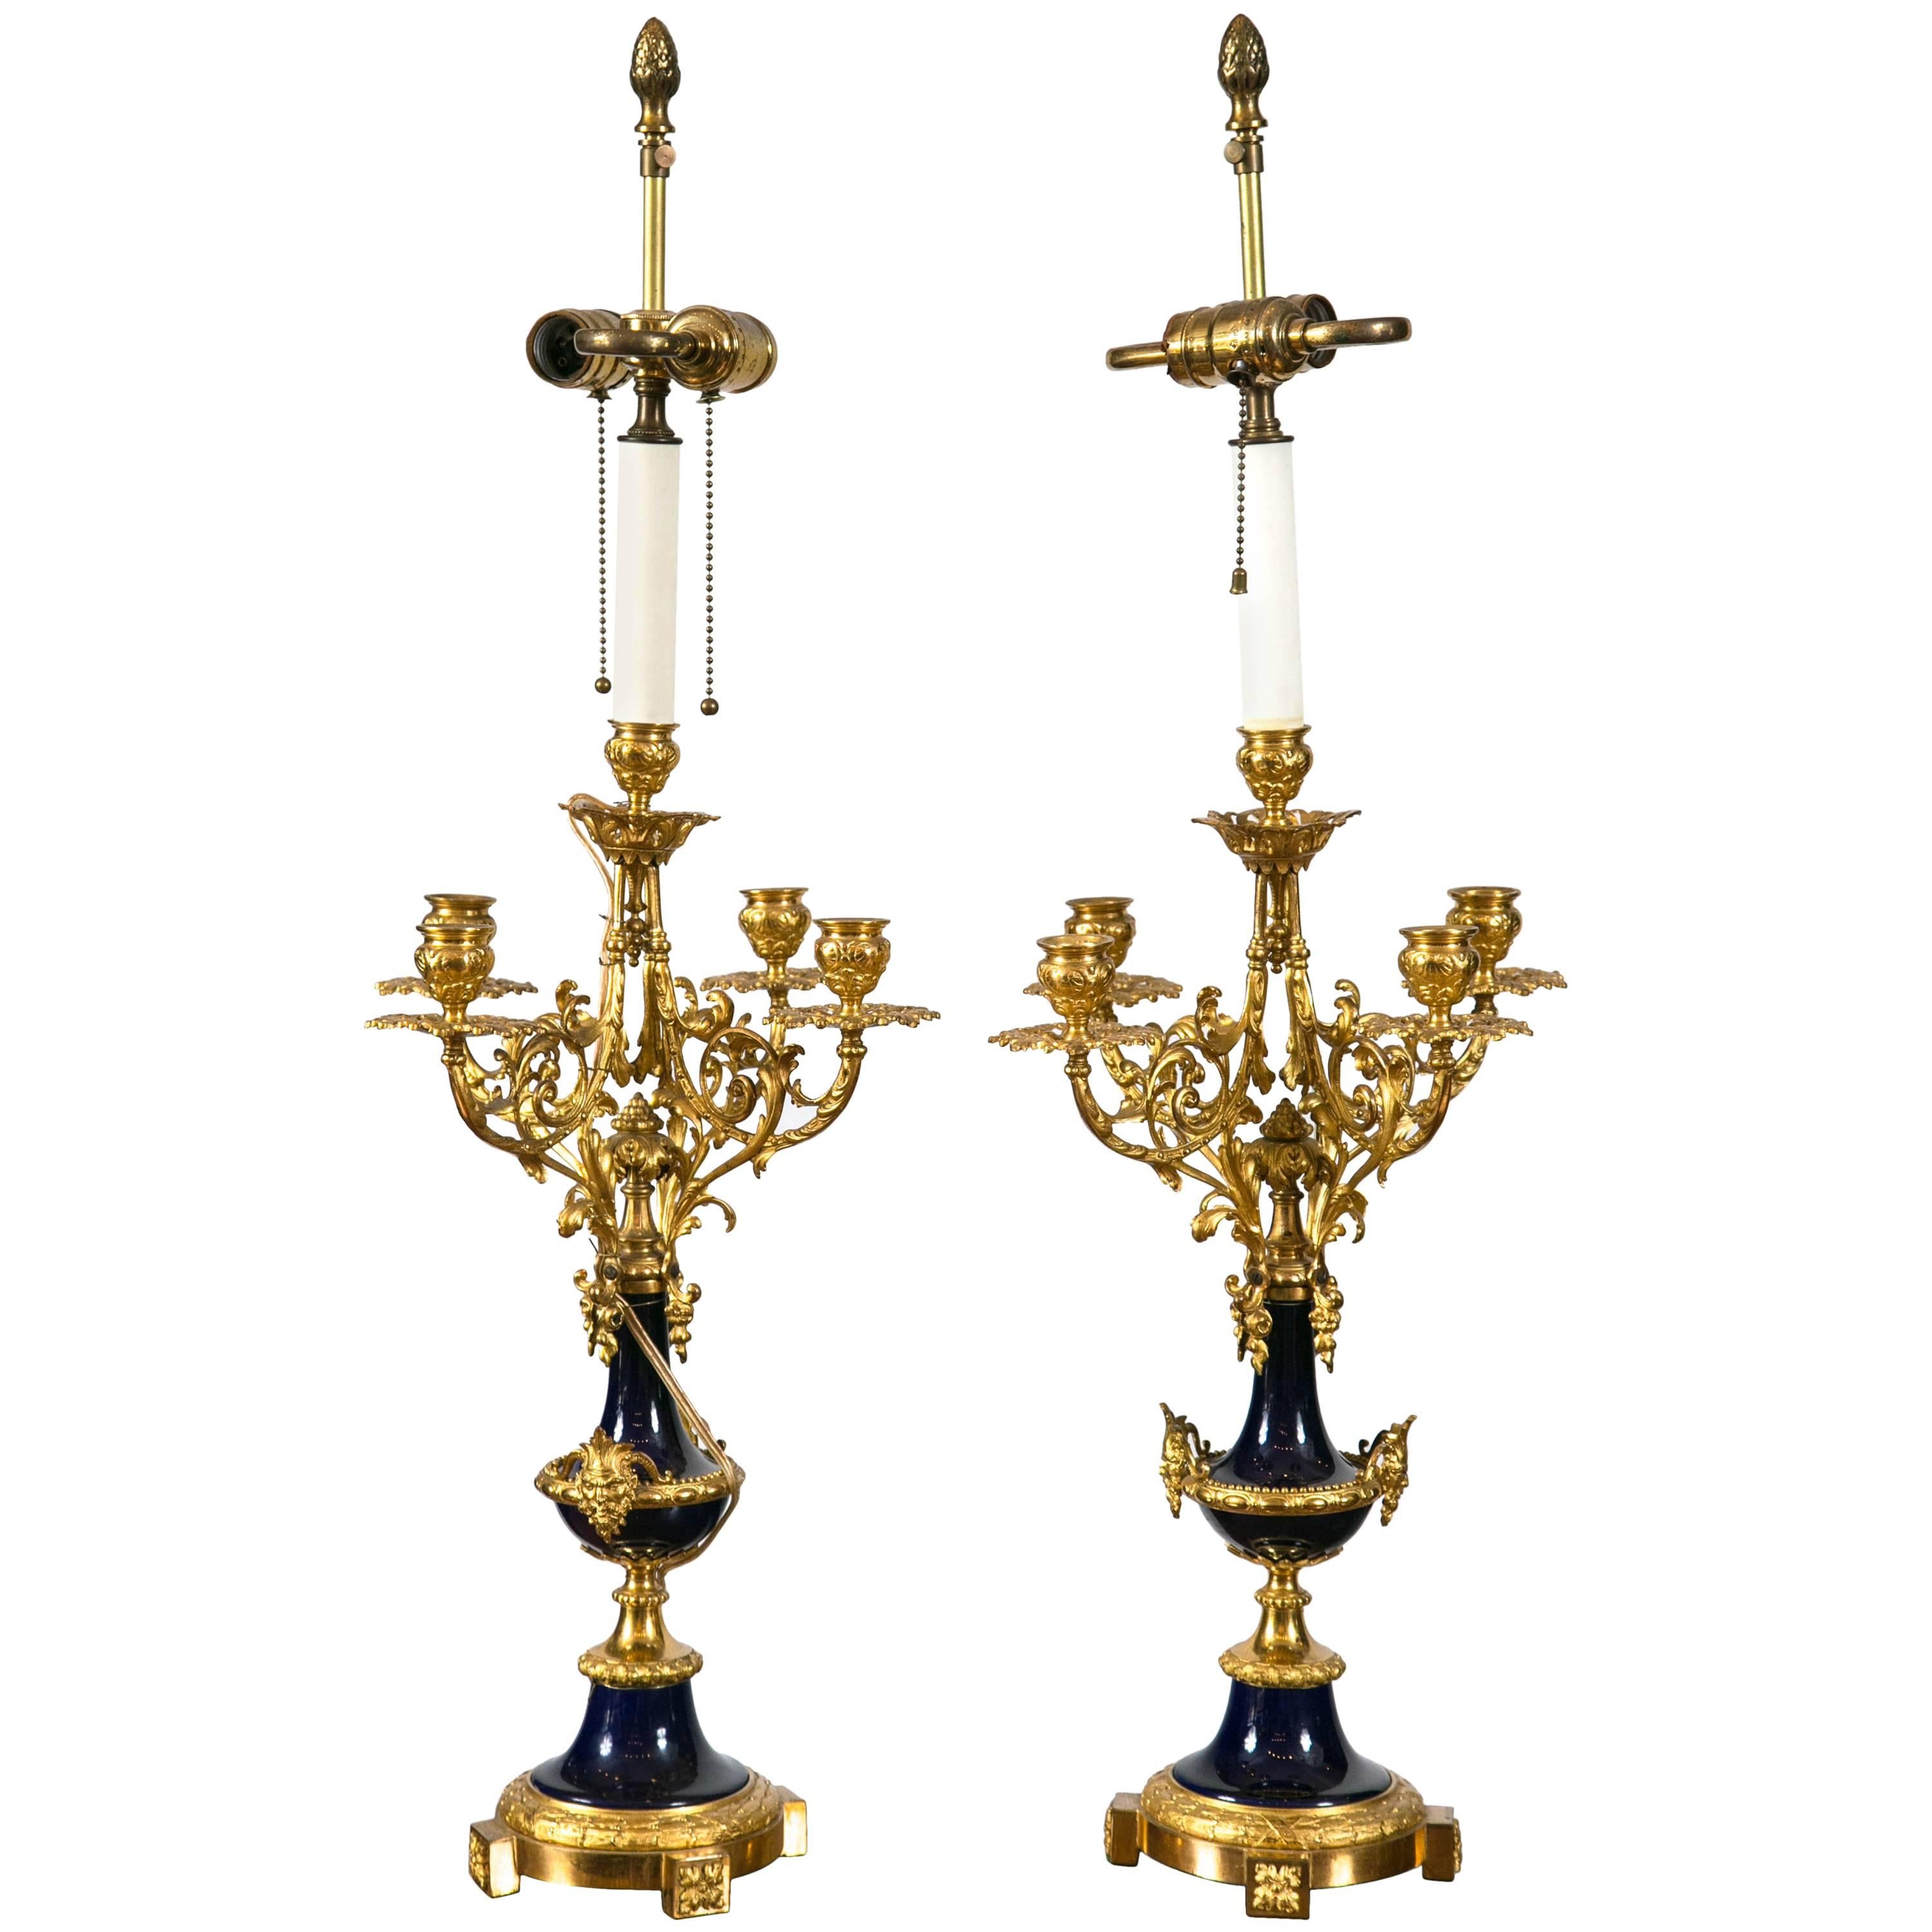 Pair of French Louis XVI Cobalt Blue Porcelain and Ormolu Candelabra Lamps